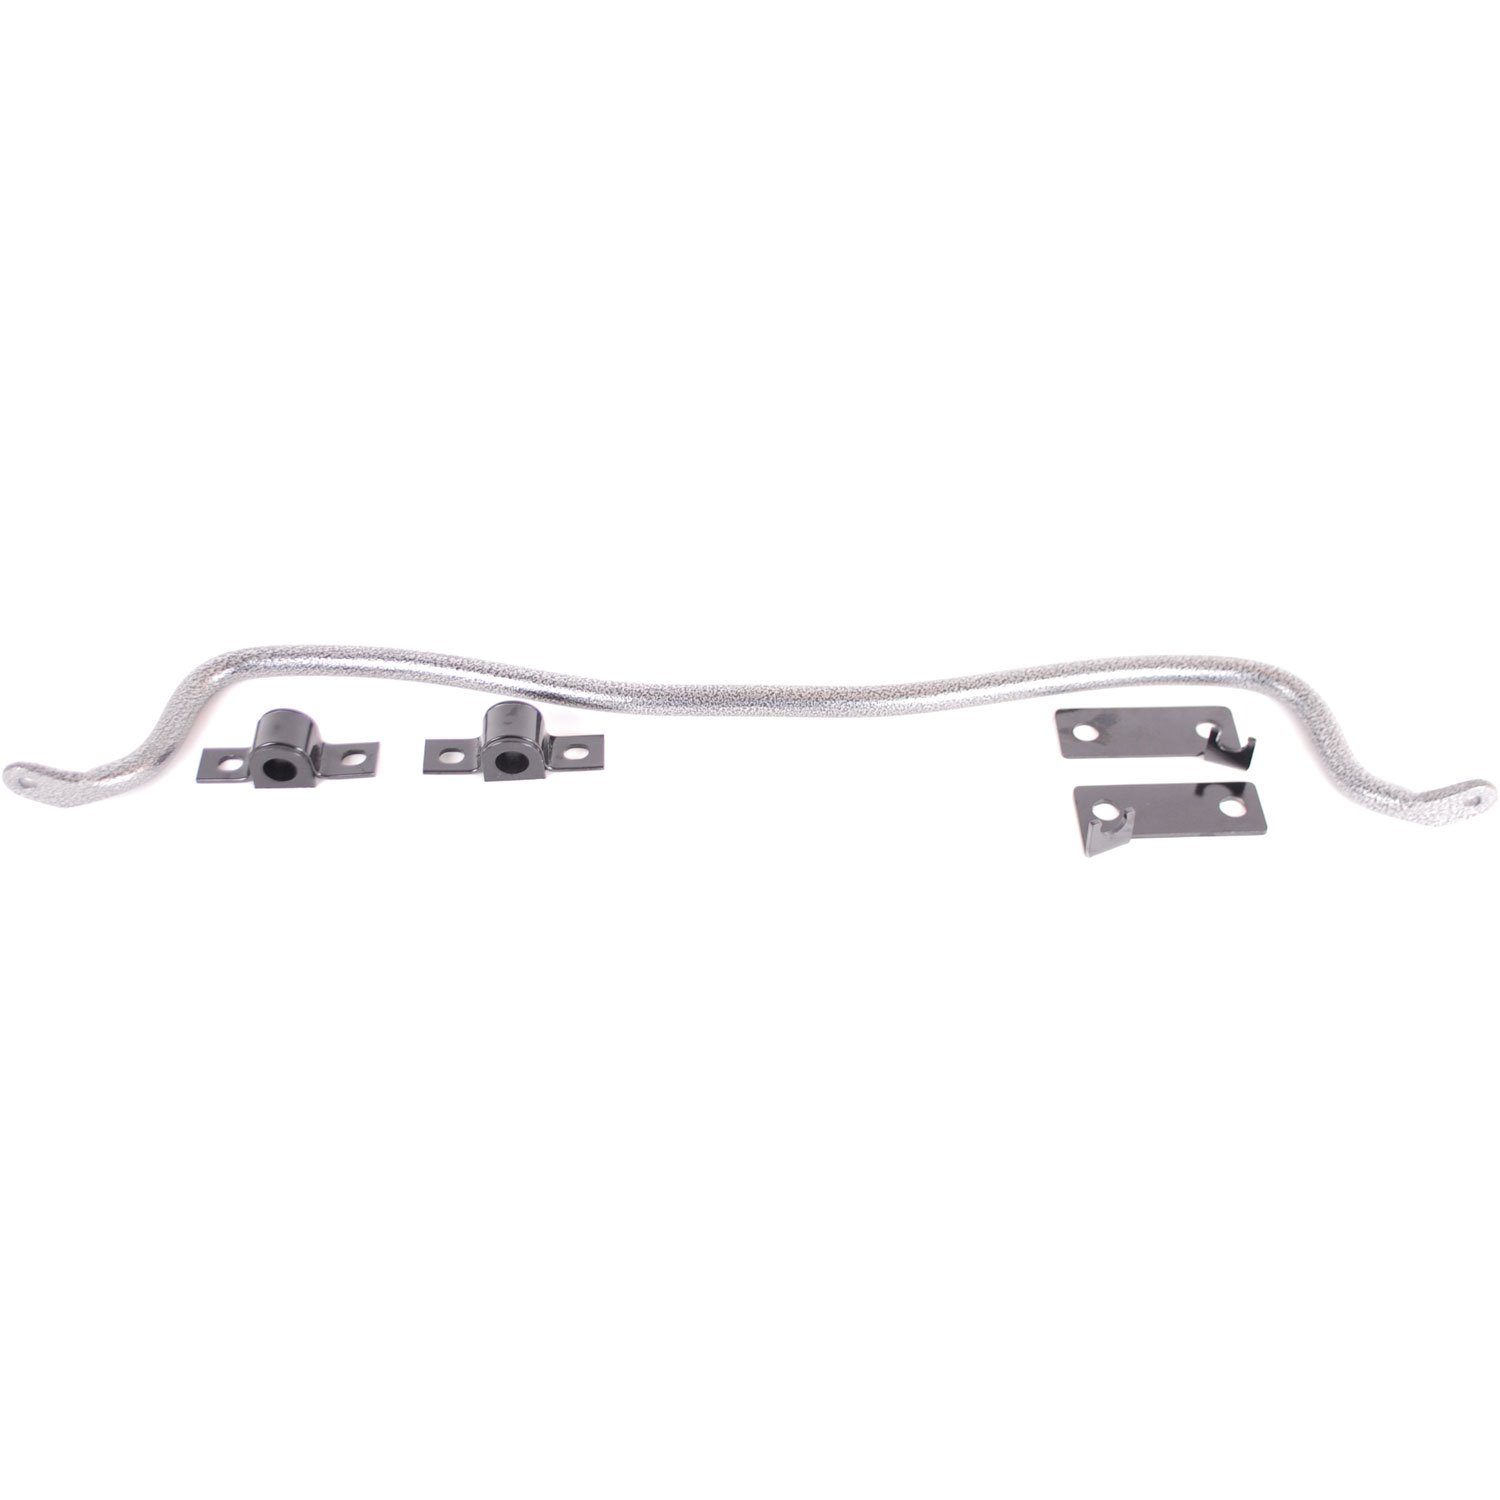 Rear Sway Bar for 2014-2015 Jeep Grand Cherokee